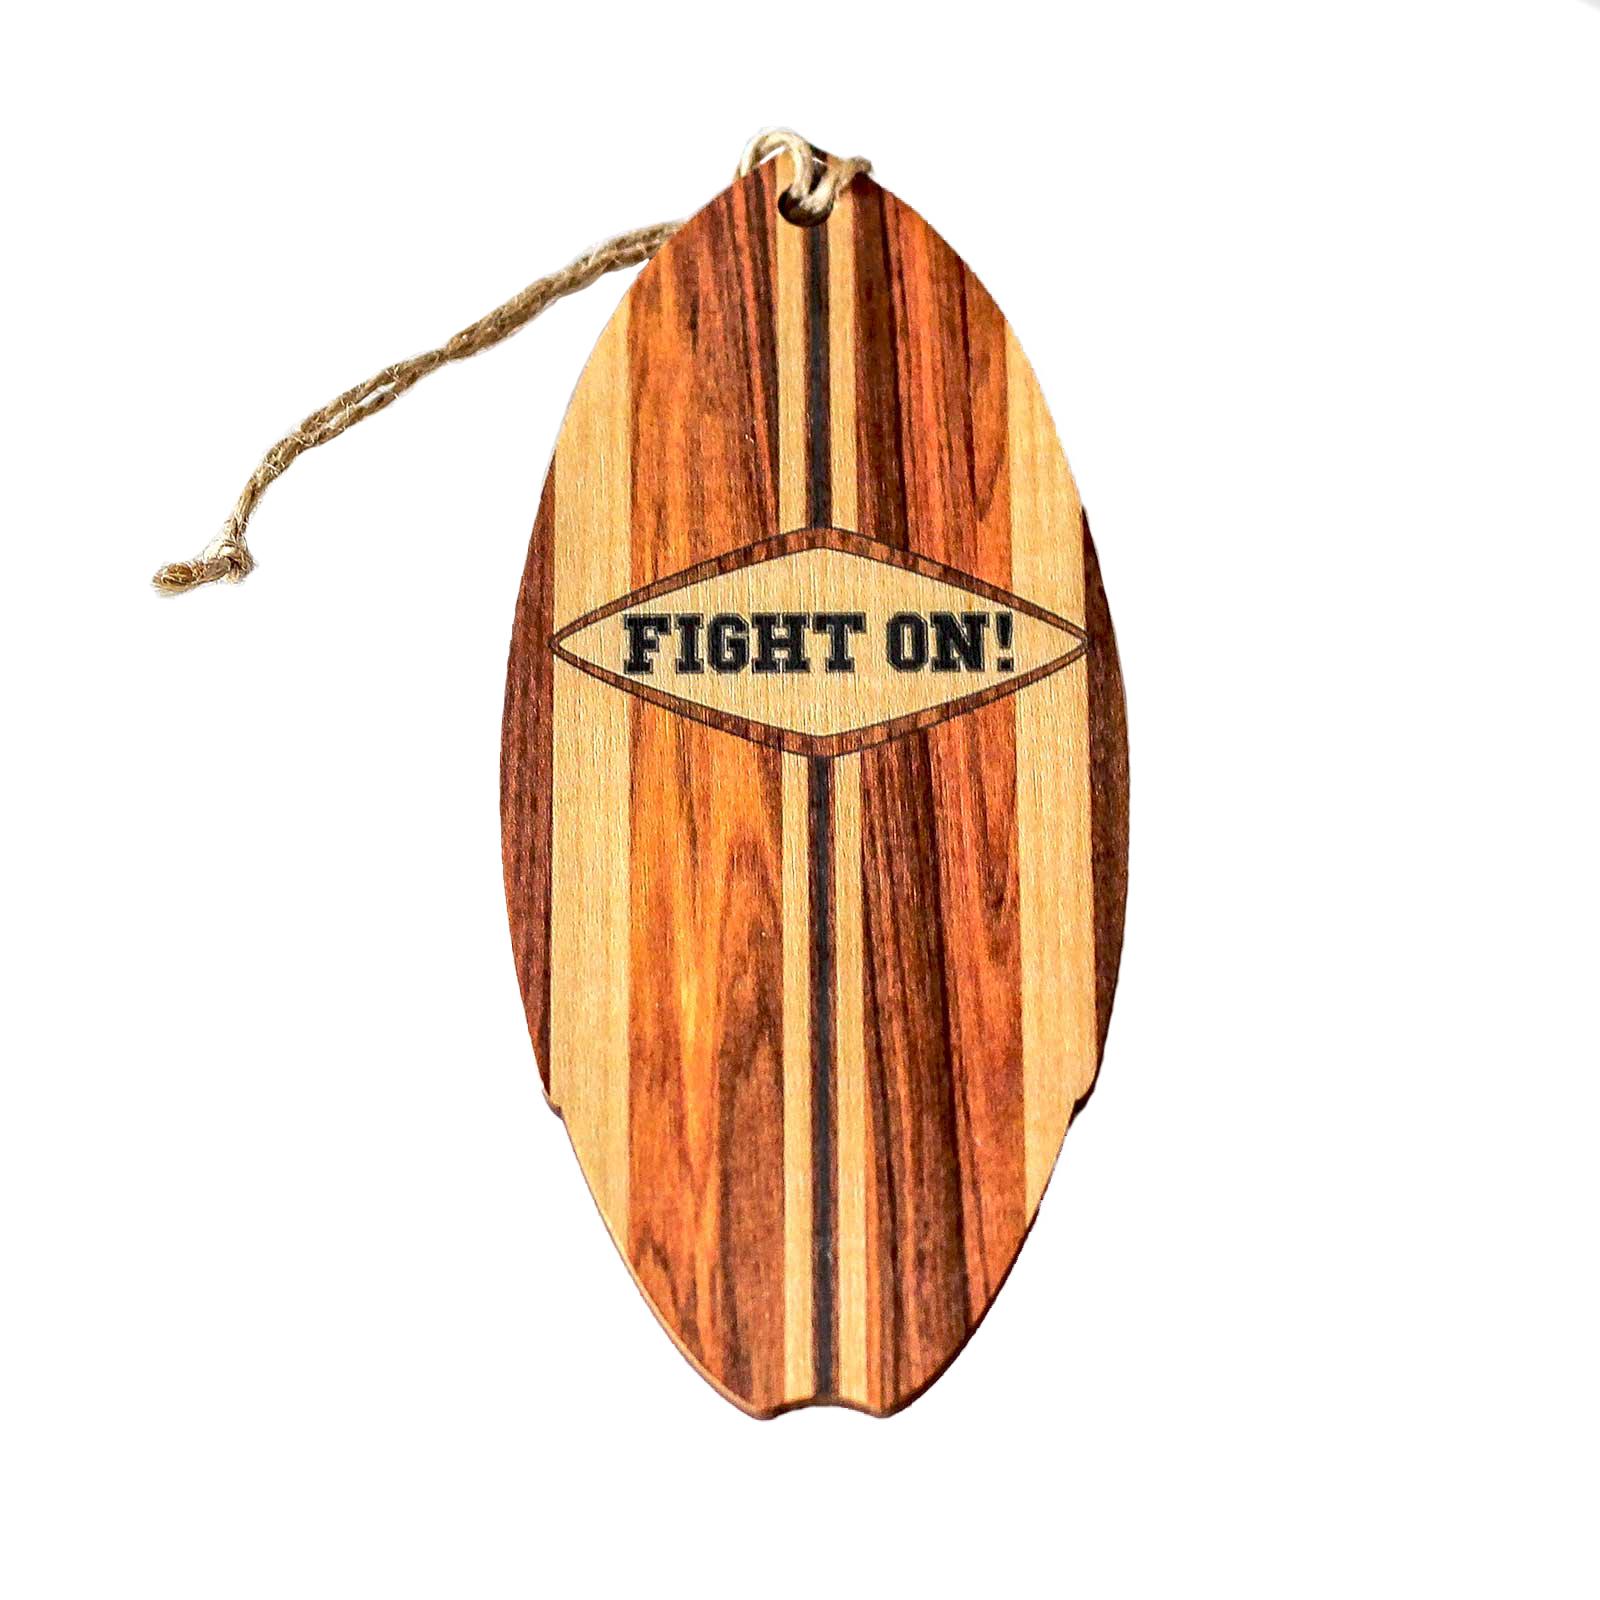 USC Fight On Wooden Surfboard Ornament by Preserve Press image01